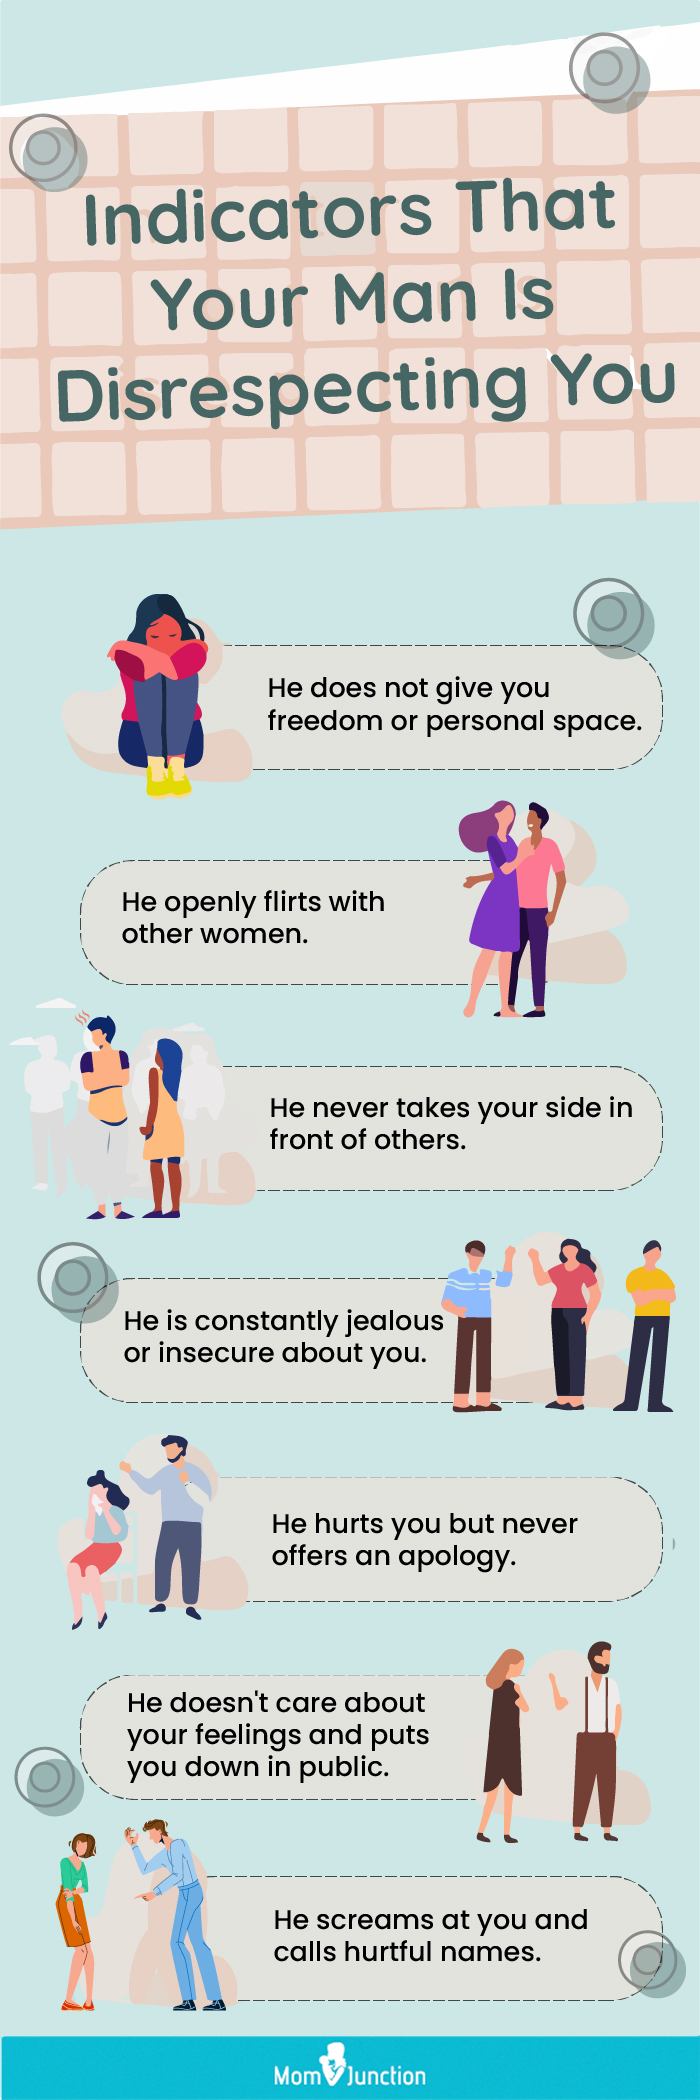 indicators that your man is disrespecting you [infographic]